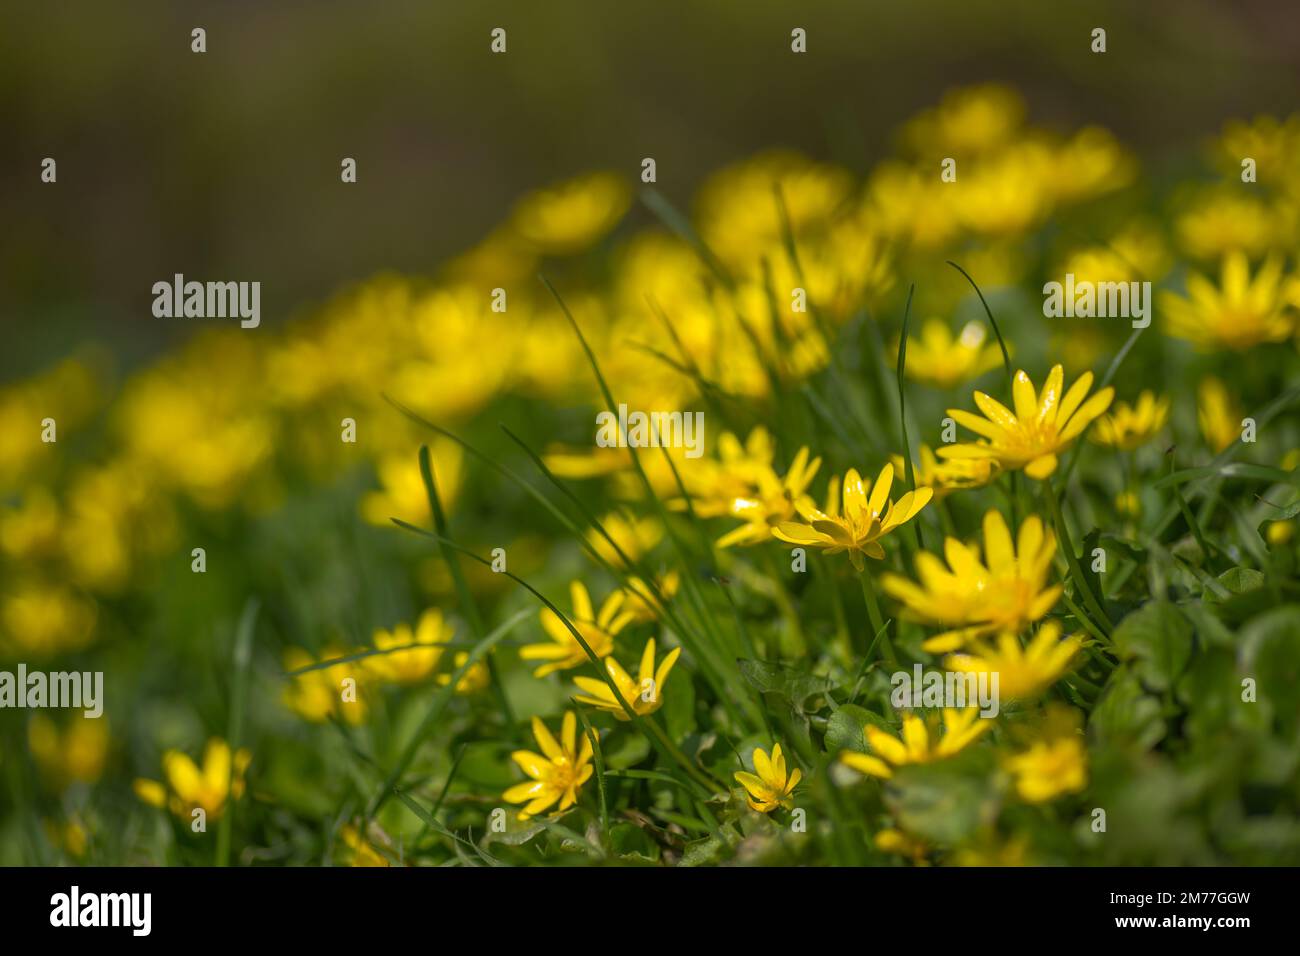 Ficaria verna, Ranunculus ficaria L., lesser celandine or pilewort, fig buttercup yellow flowers with green leaves in a clearing in the spring. Spring Stock Photo